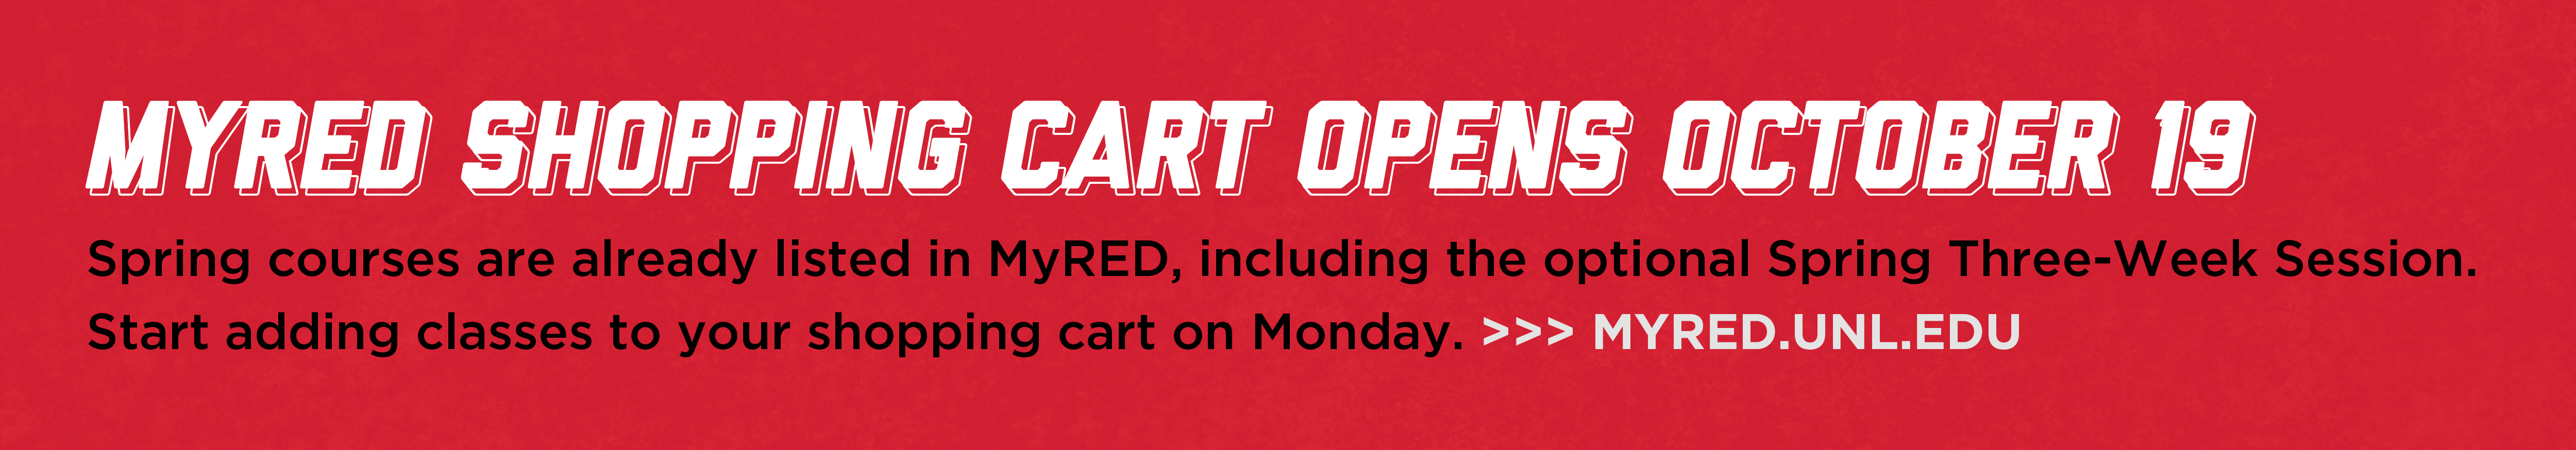 MyRed Shopping Cart opens October 19, 2020. Spring courses are already listed in MyRed, including the optional Spring Three-Week Session. Start adding classes to your shopping cart on Monday, October 19. 